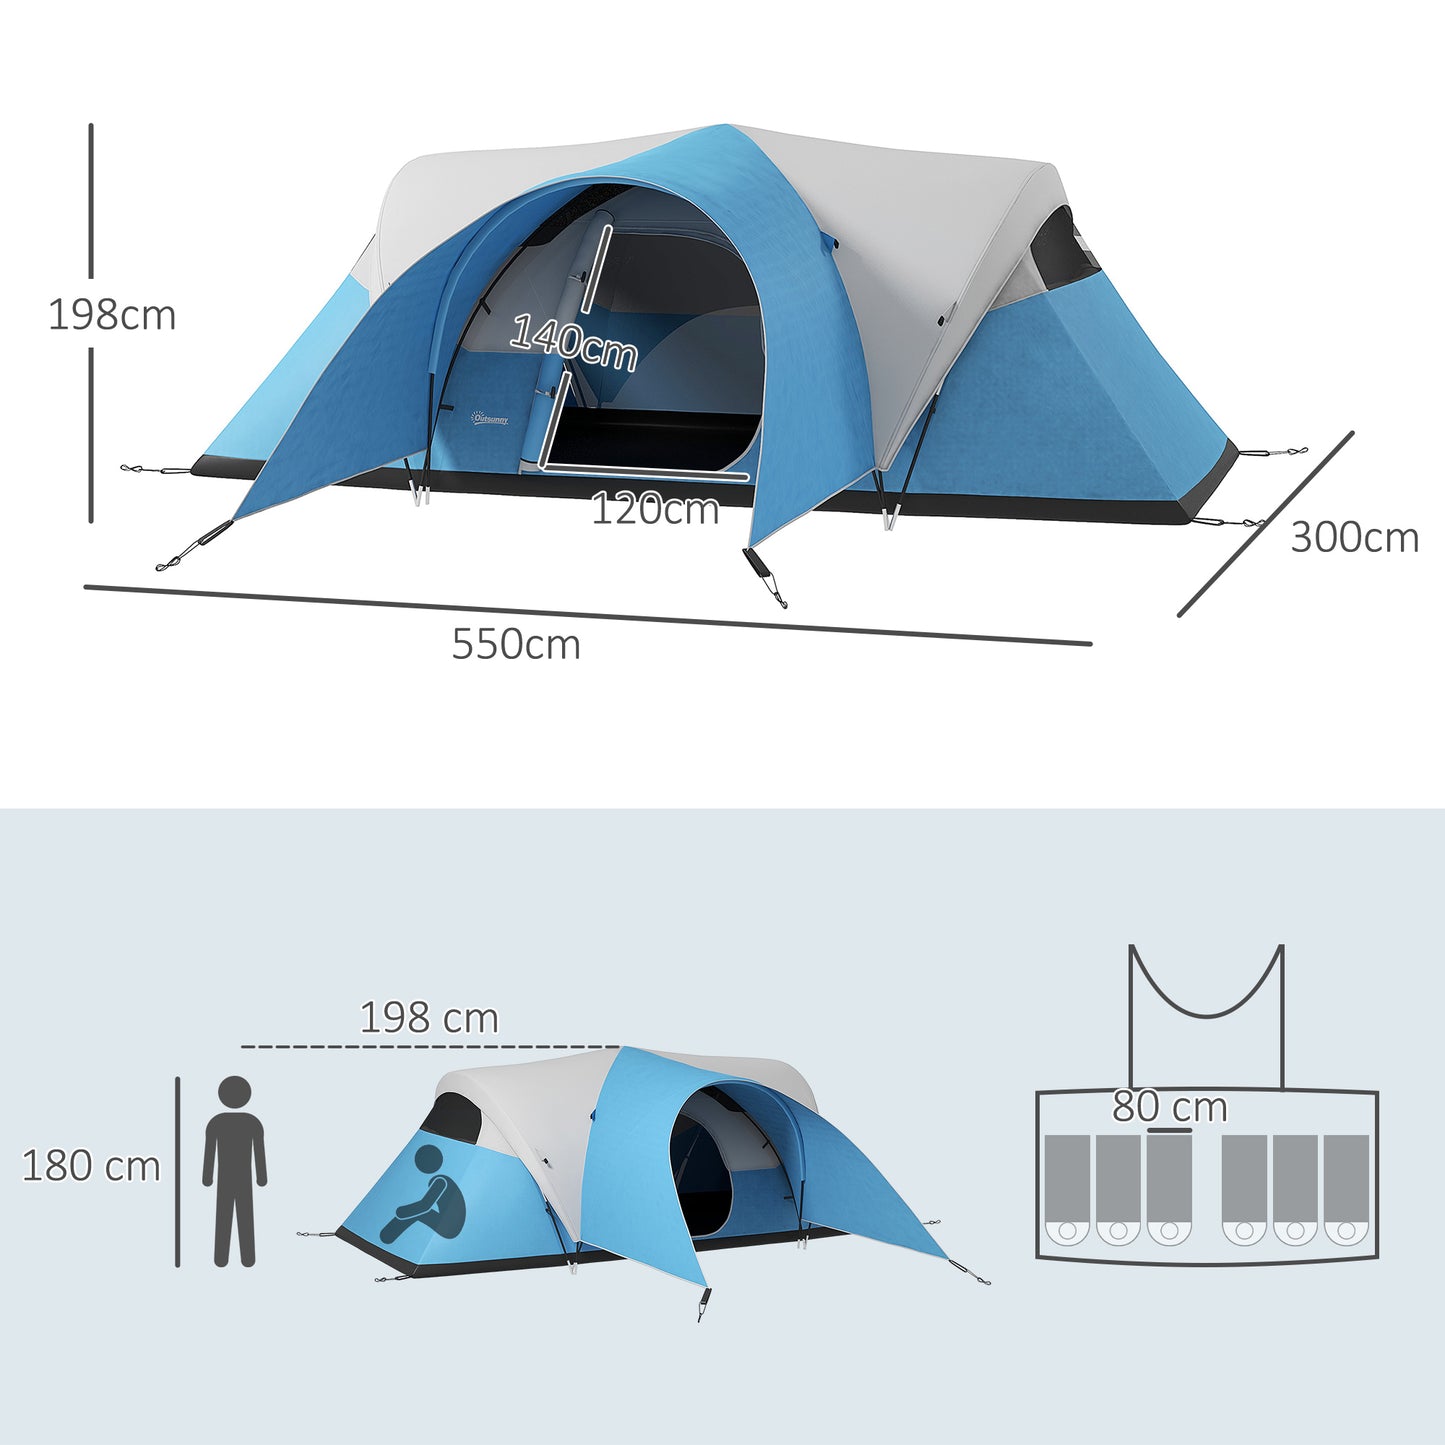 Outsunny 3000mm Waterproof Camping Tent for 5-6 Man Family Tent with Porch and Sewn in Groundsheet Portable with Bag Blue